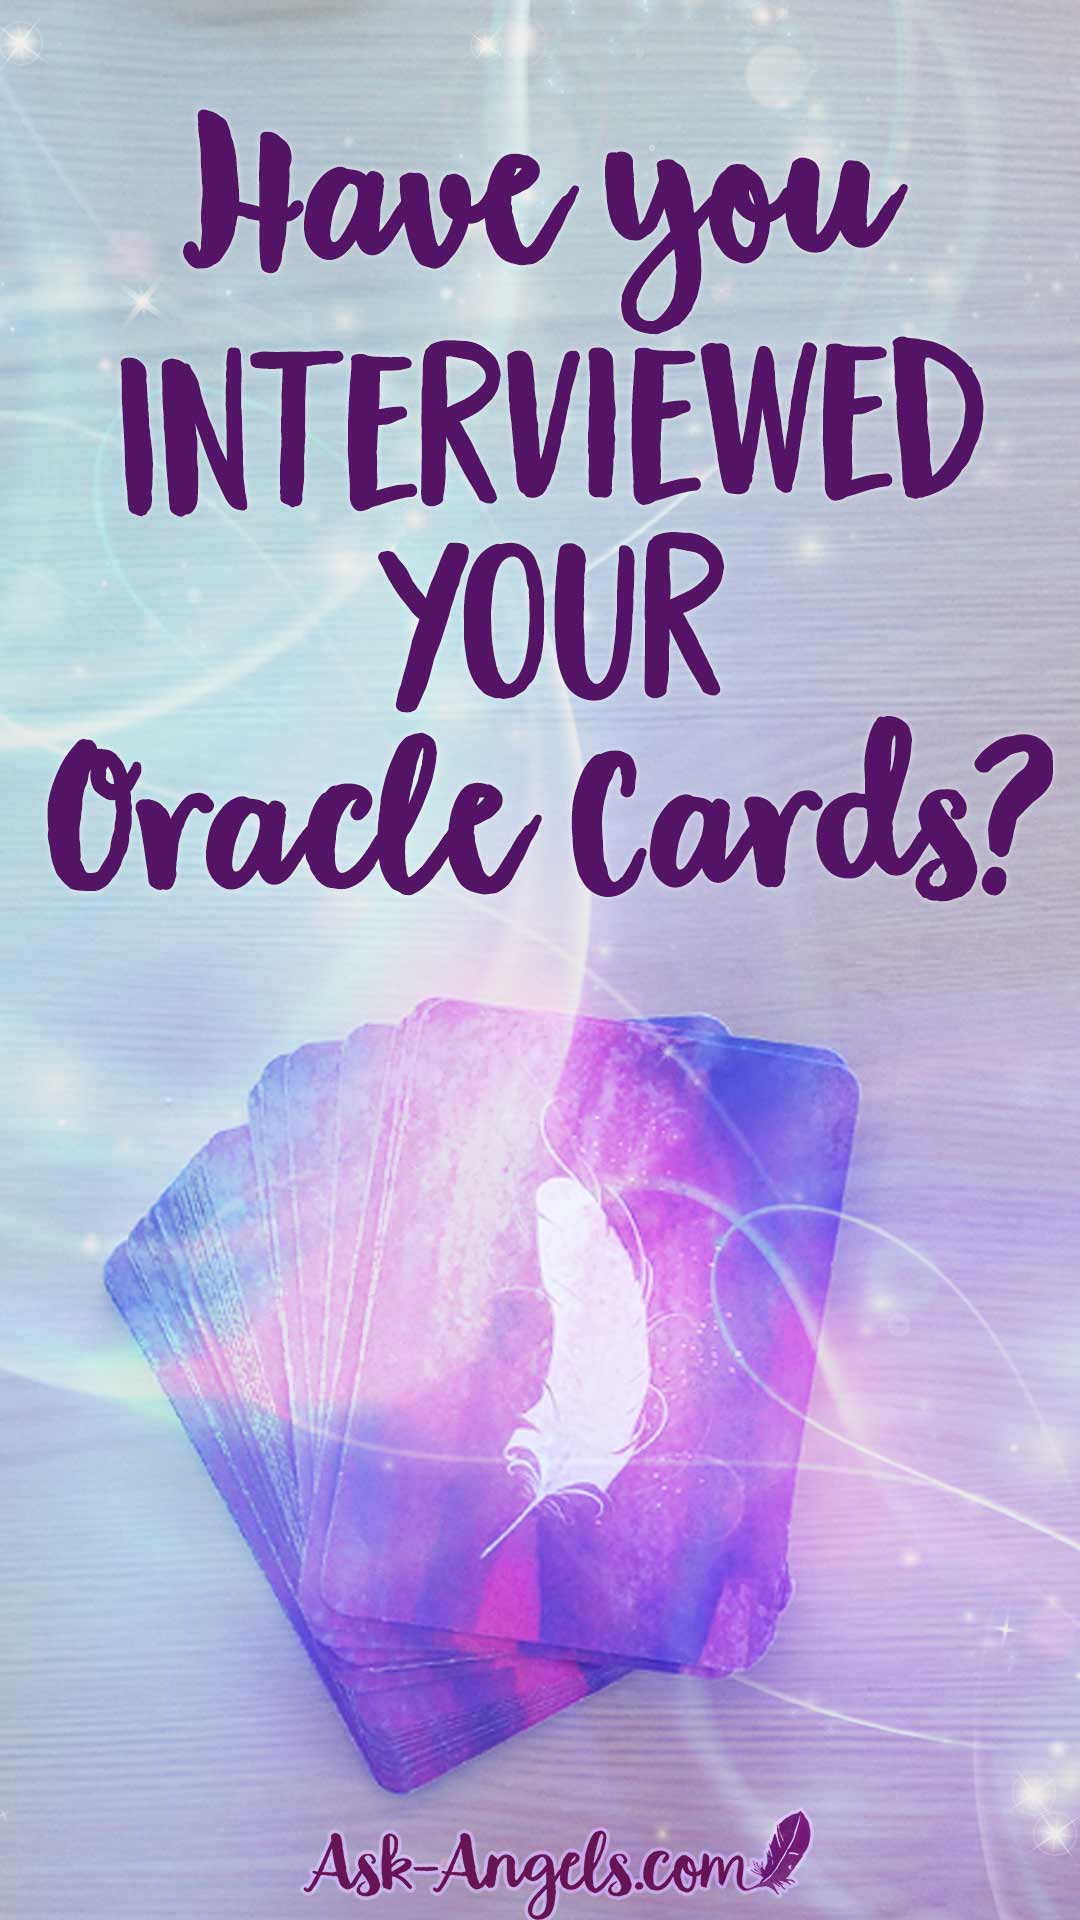 Have you interviewed your Oracle Cards?